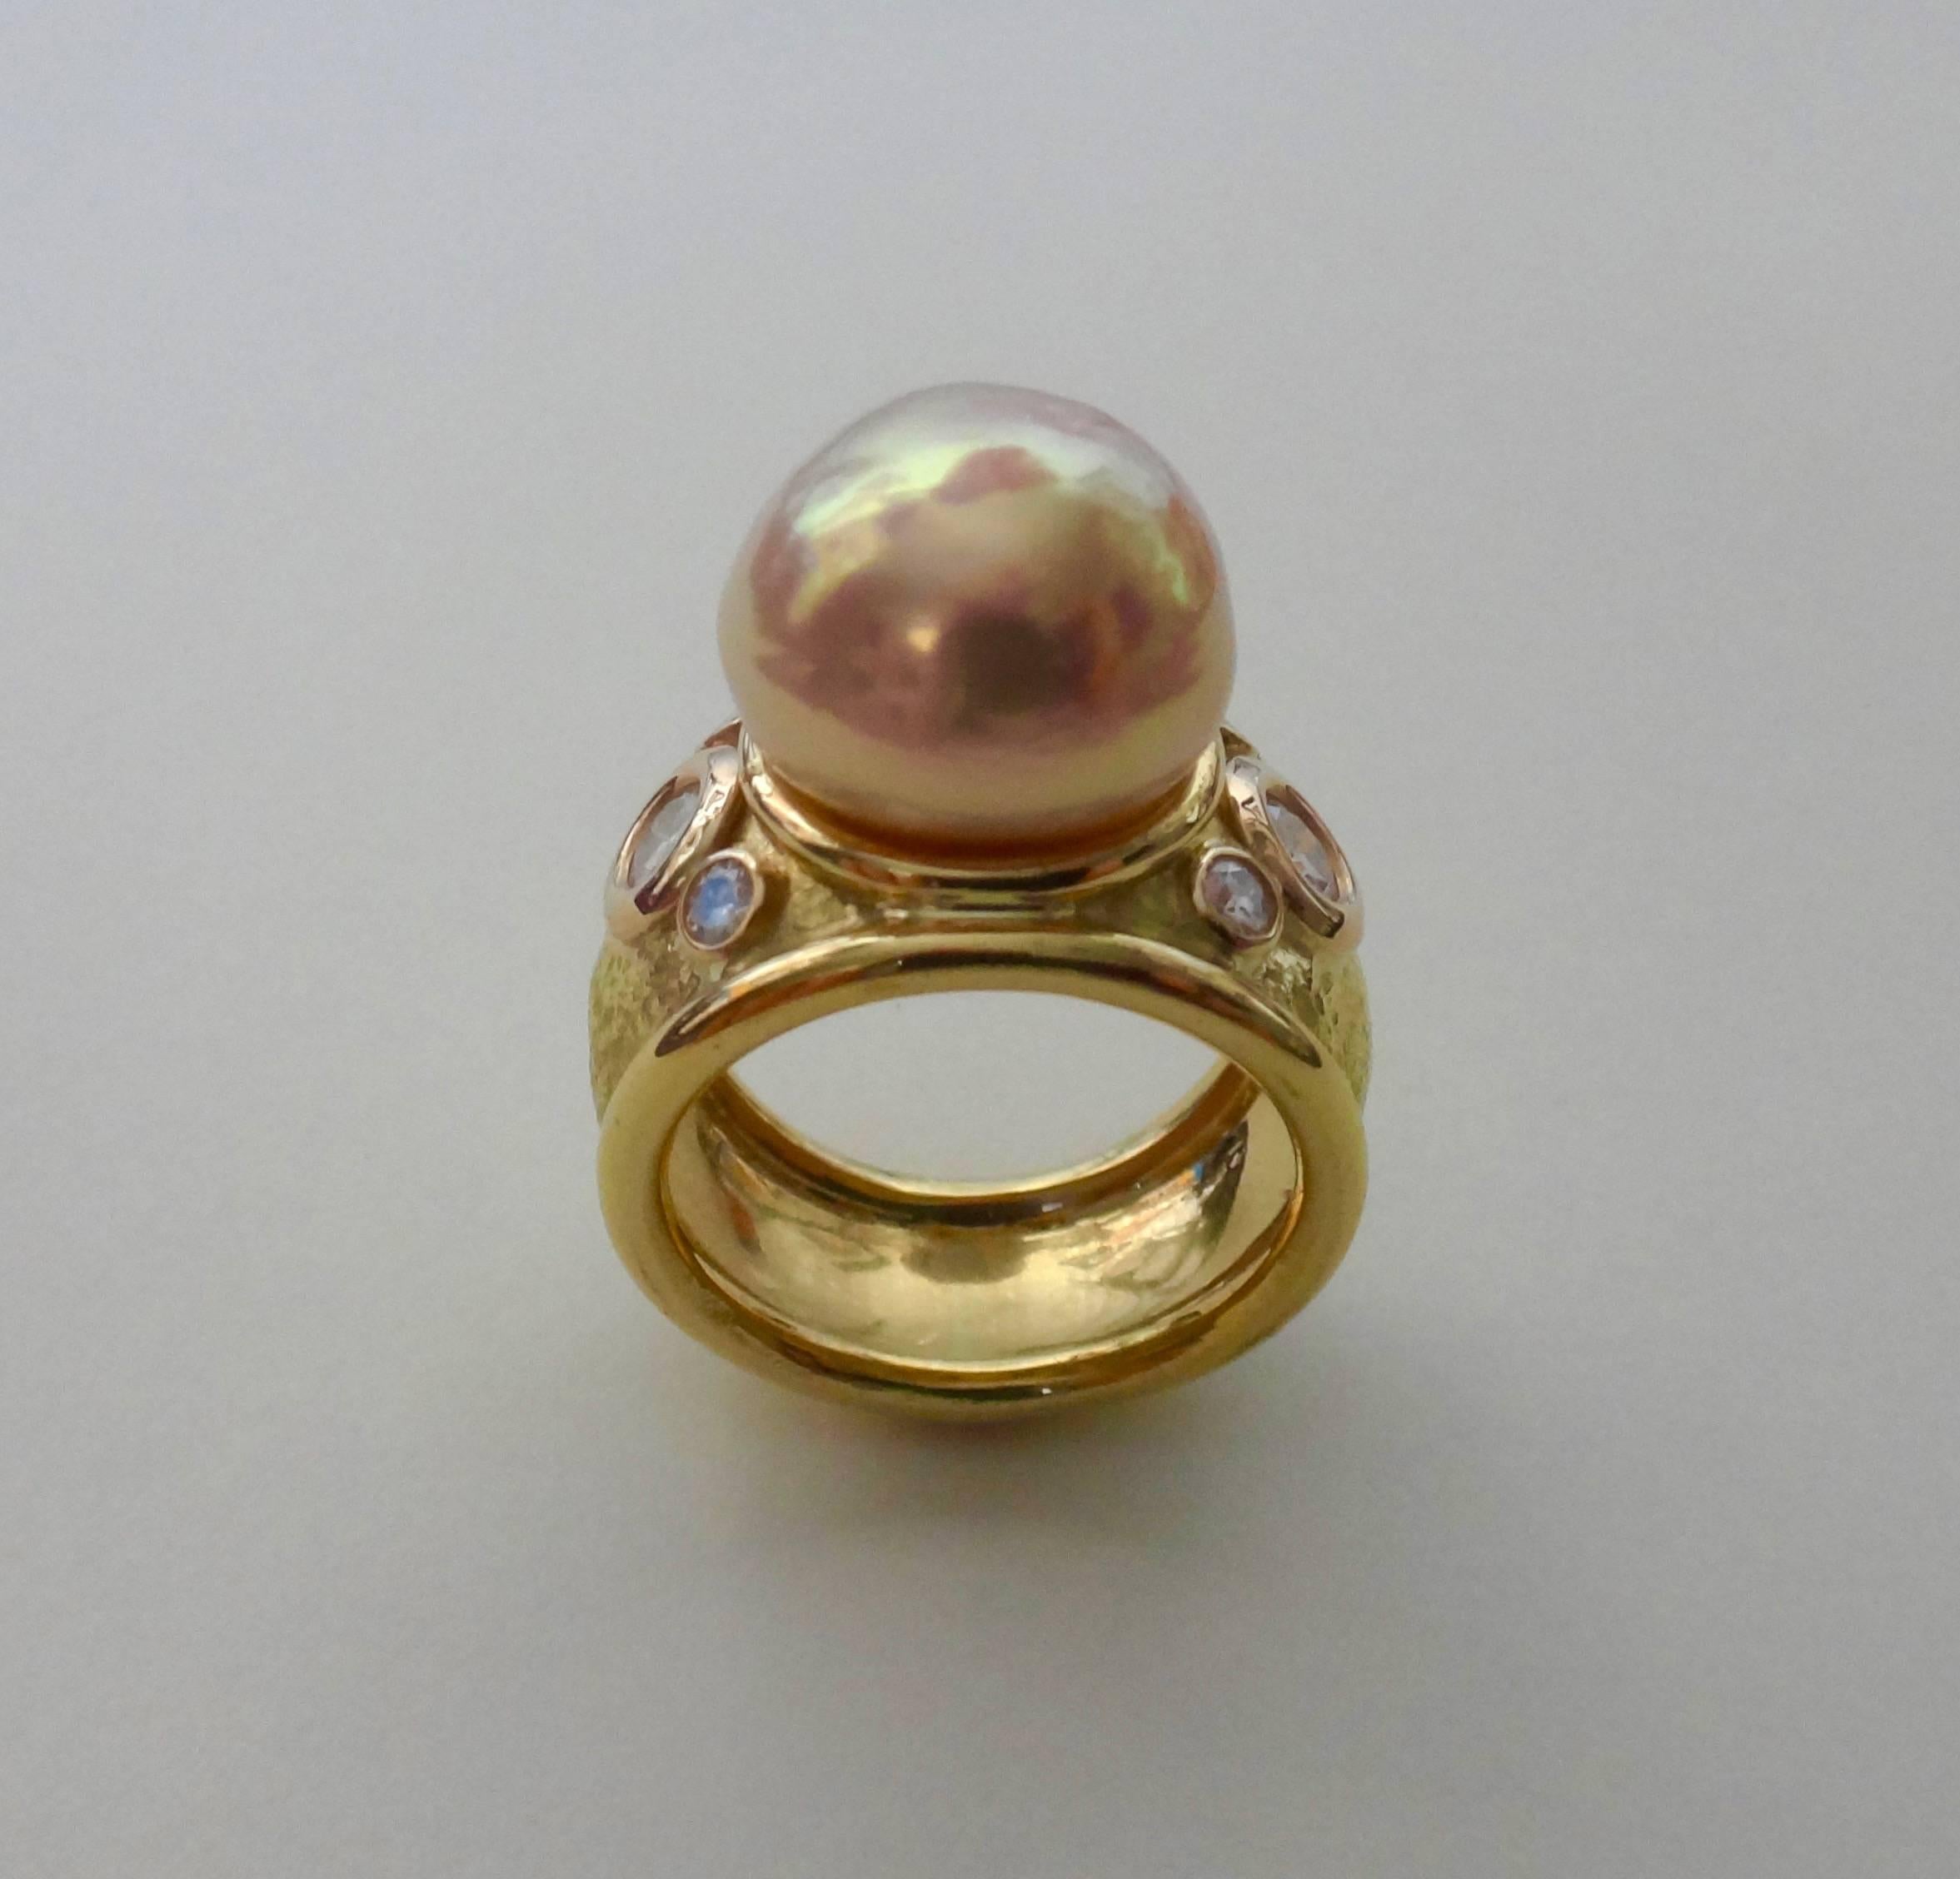 A 13mm Kasumi Pearl possessing great luster and finish , is featured in this hand fabricated "Bombe" style ring created in 18k yellow gold. Grown in the fresh water of Lake Kasumi ga Ura, Japan, these pearls are famous for their intense